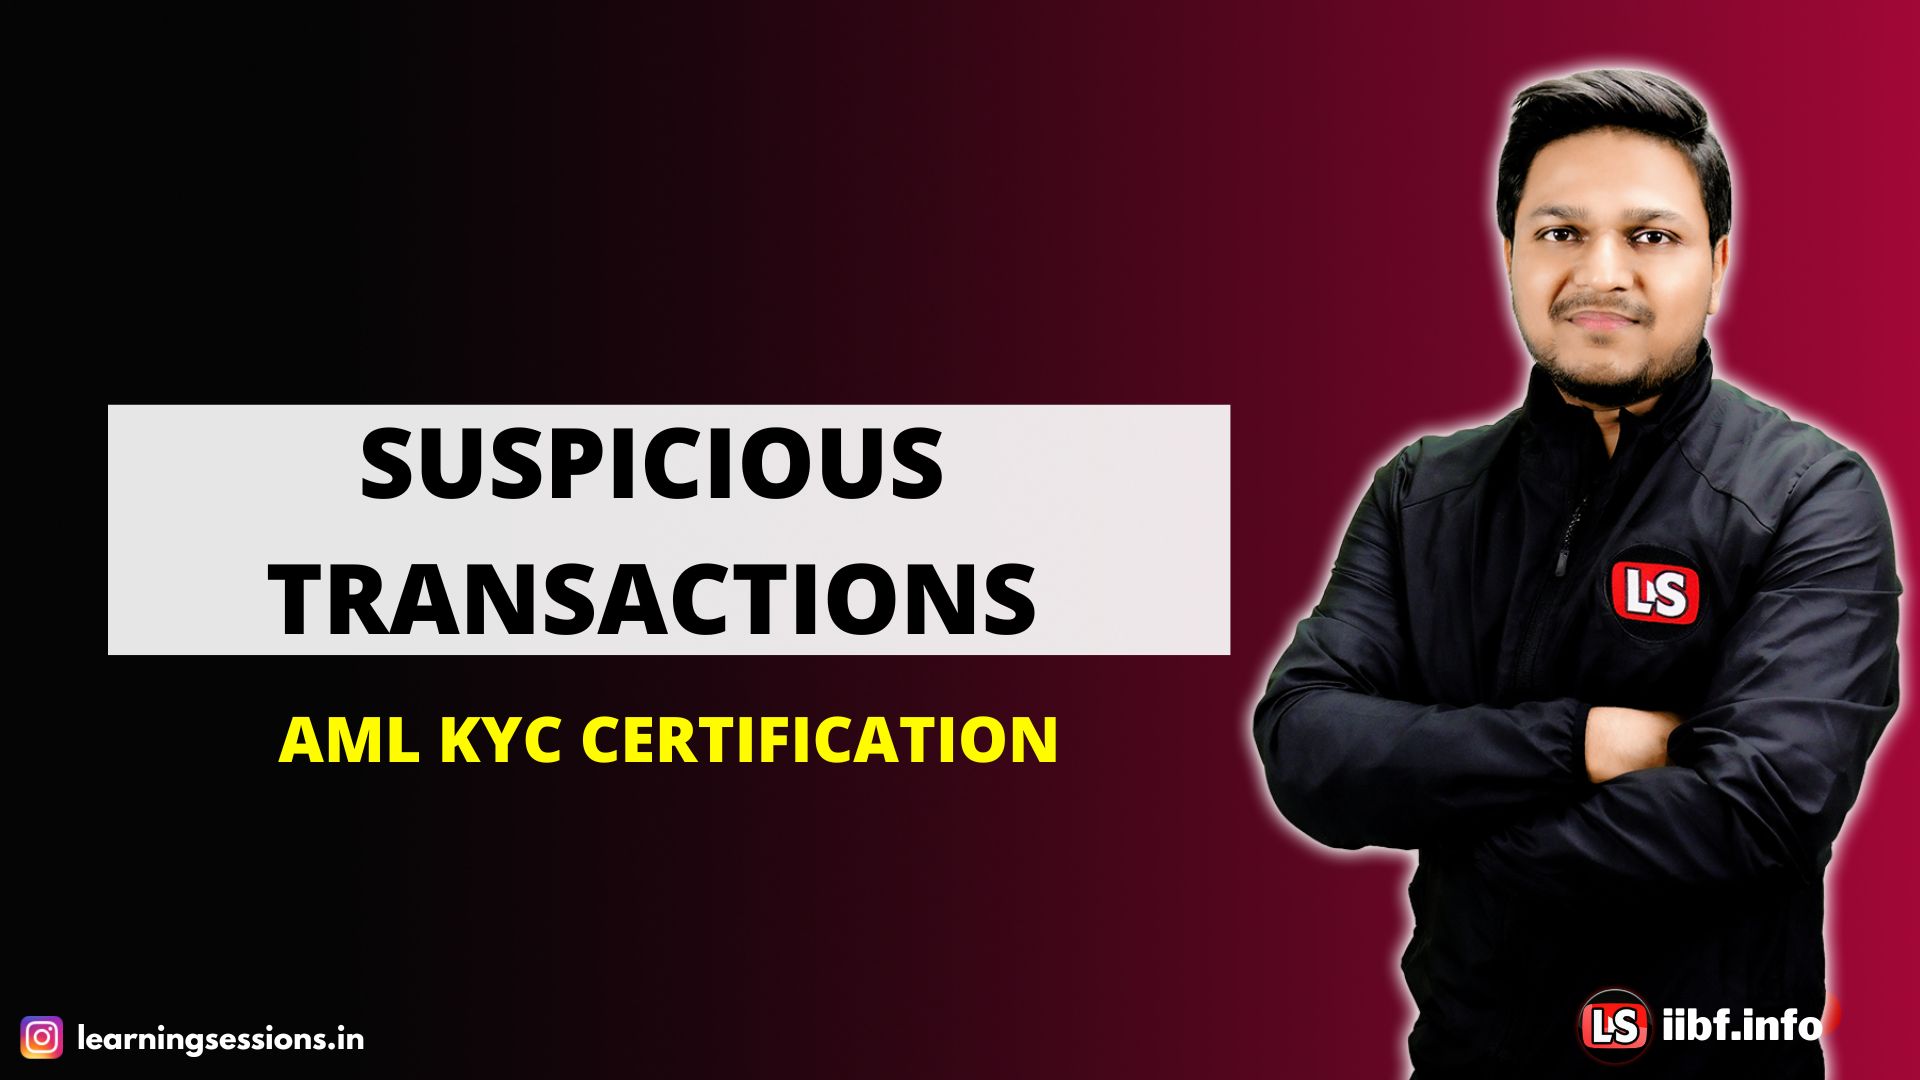 IIBF 2022 EXAMS | AML KYC CERTIFICATION | IMPORTANT NOTES | SUSPICIOUS TRANSACTIONS | BEST CLASSES 2022